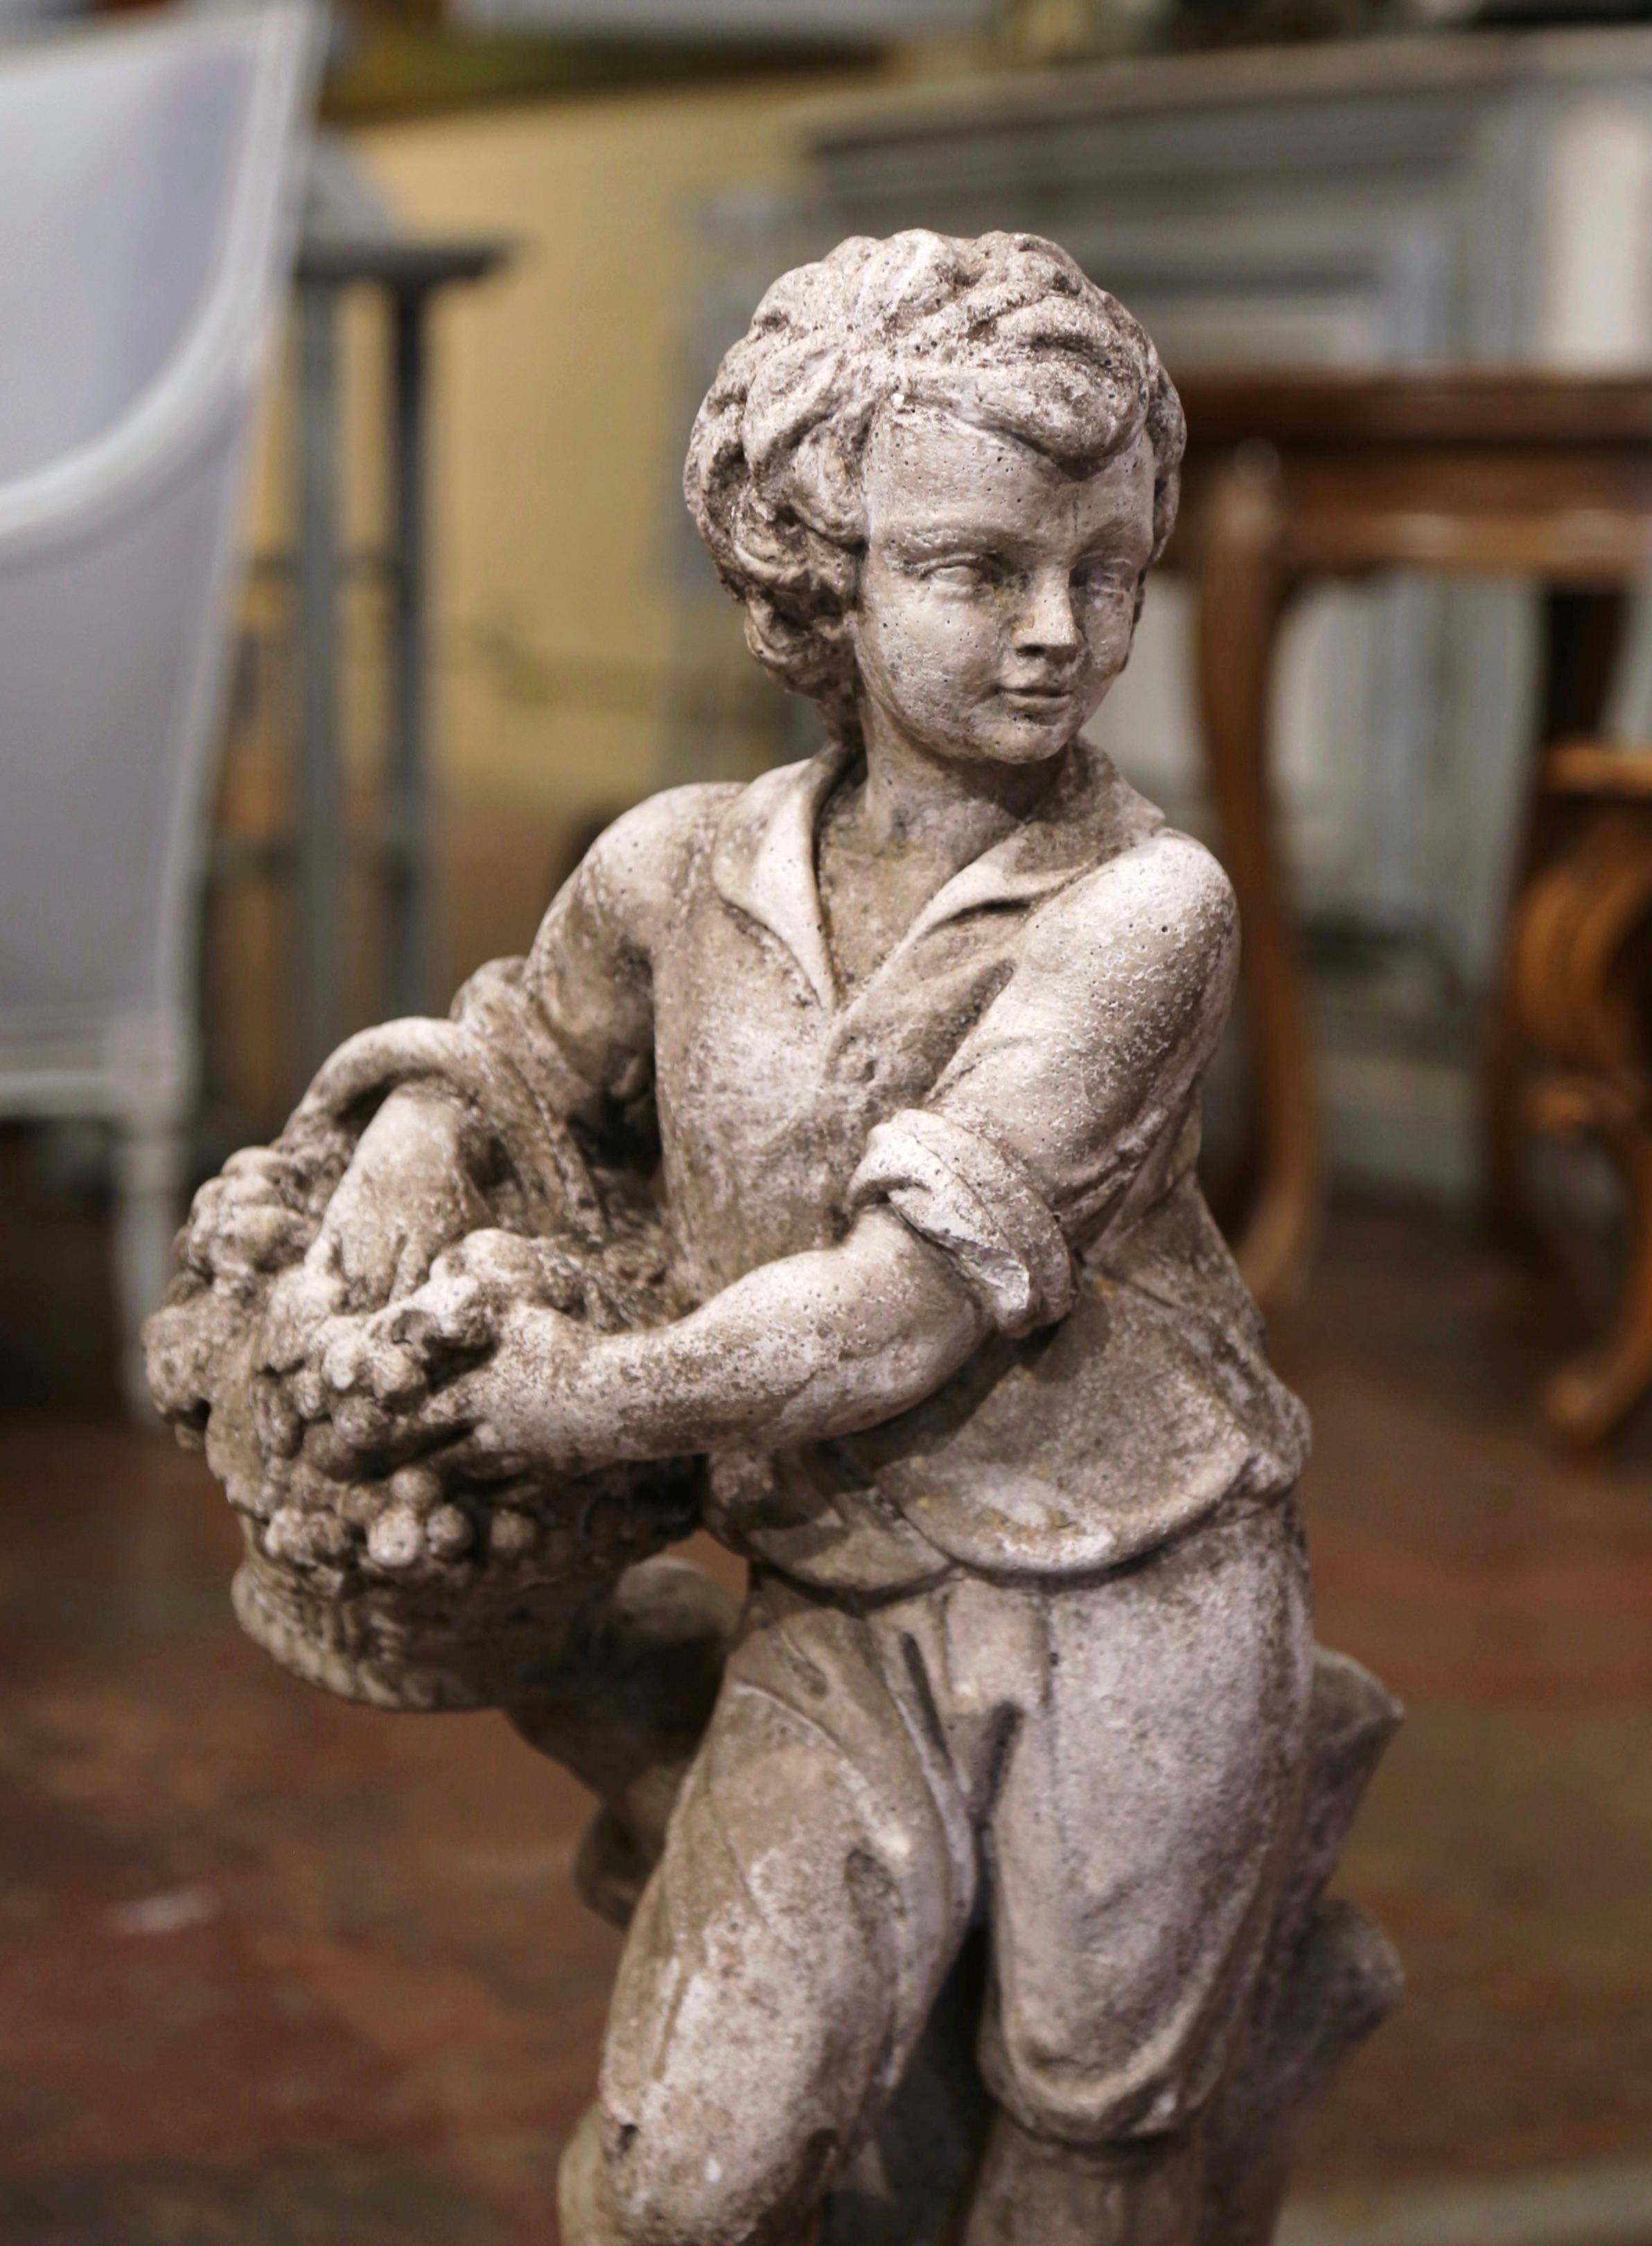 Decorate a garden or patio with this elegant antique outdoor statue. Hand carved of stone in France circa 1960, the figure is an allegorical representation of Autumn or fall, and depicts a standing young boy leaning against a tree stump and holding